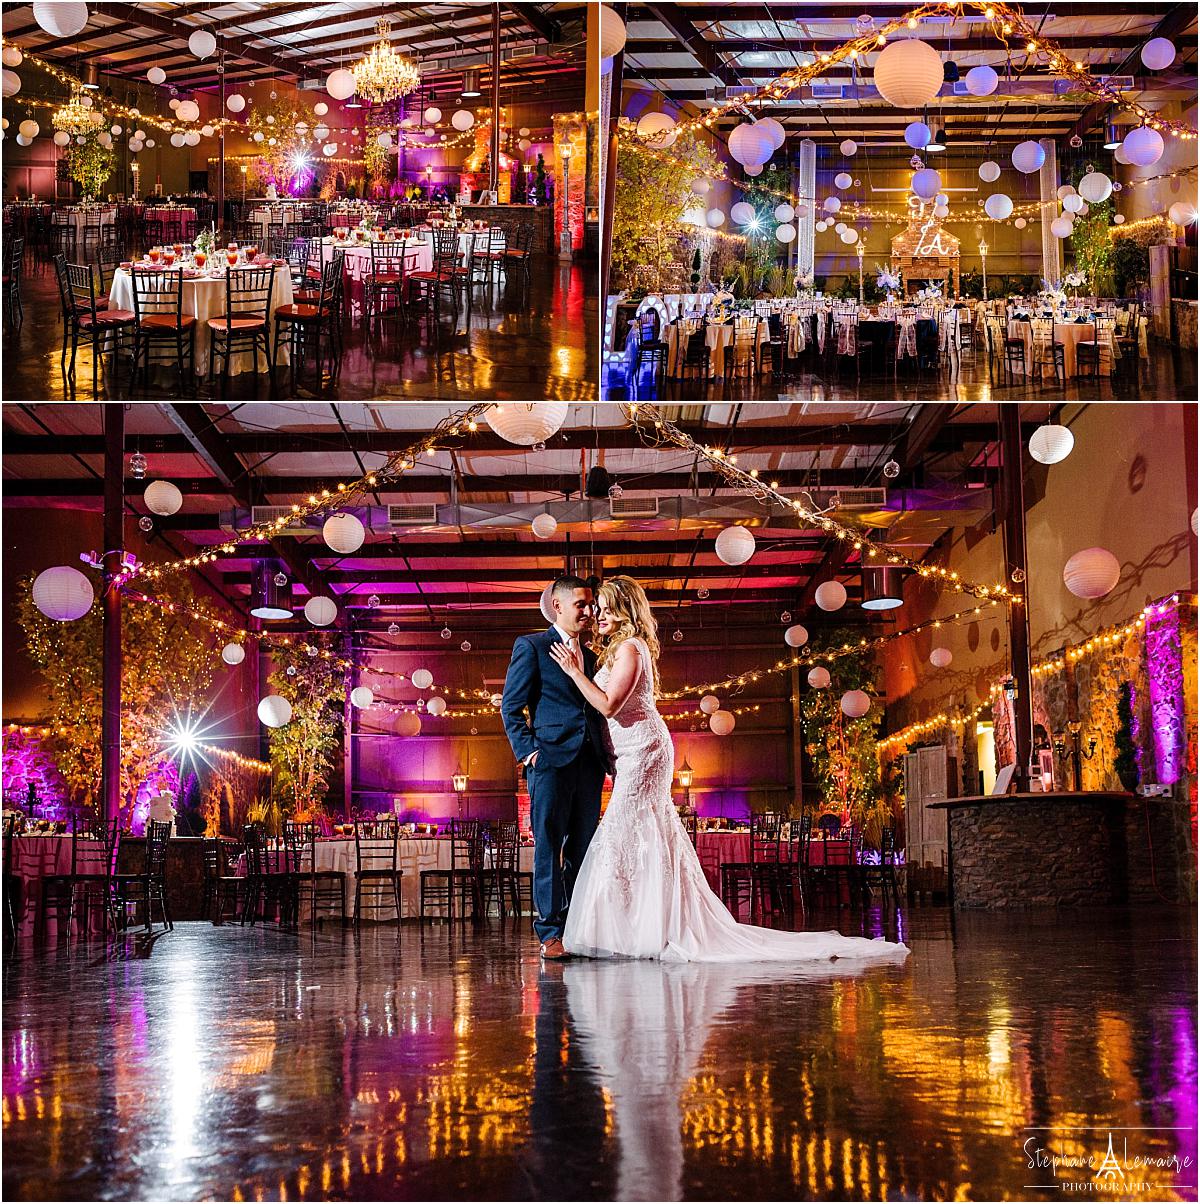 150 sunset wedding reception details in El Paso, Texas. by stephane lemaire photography